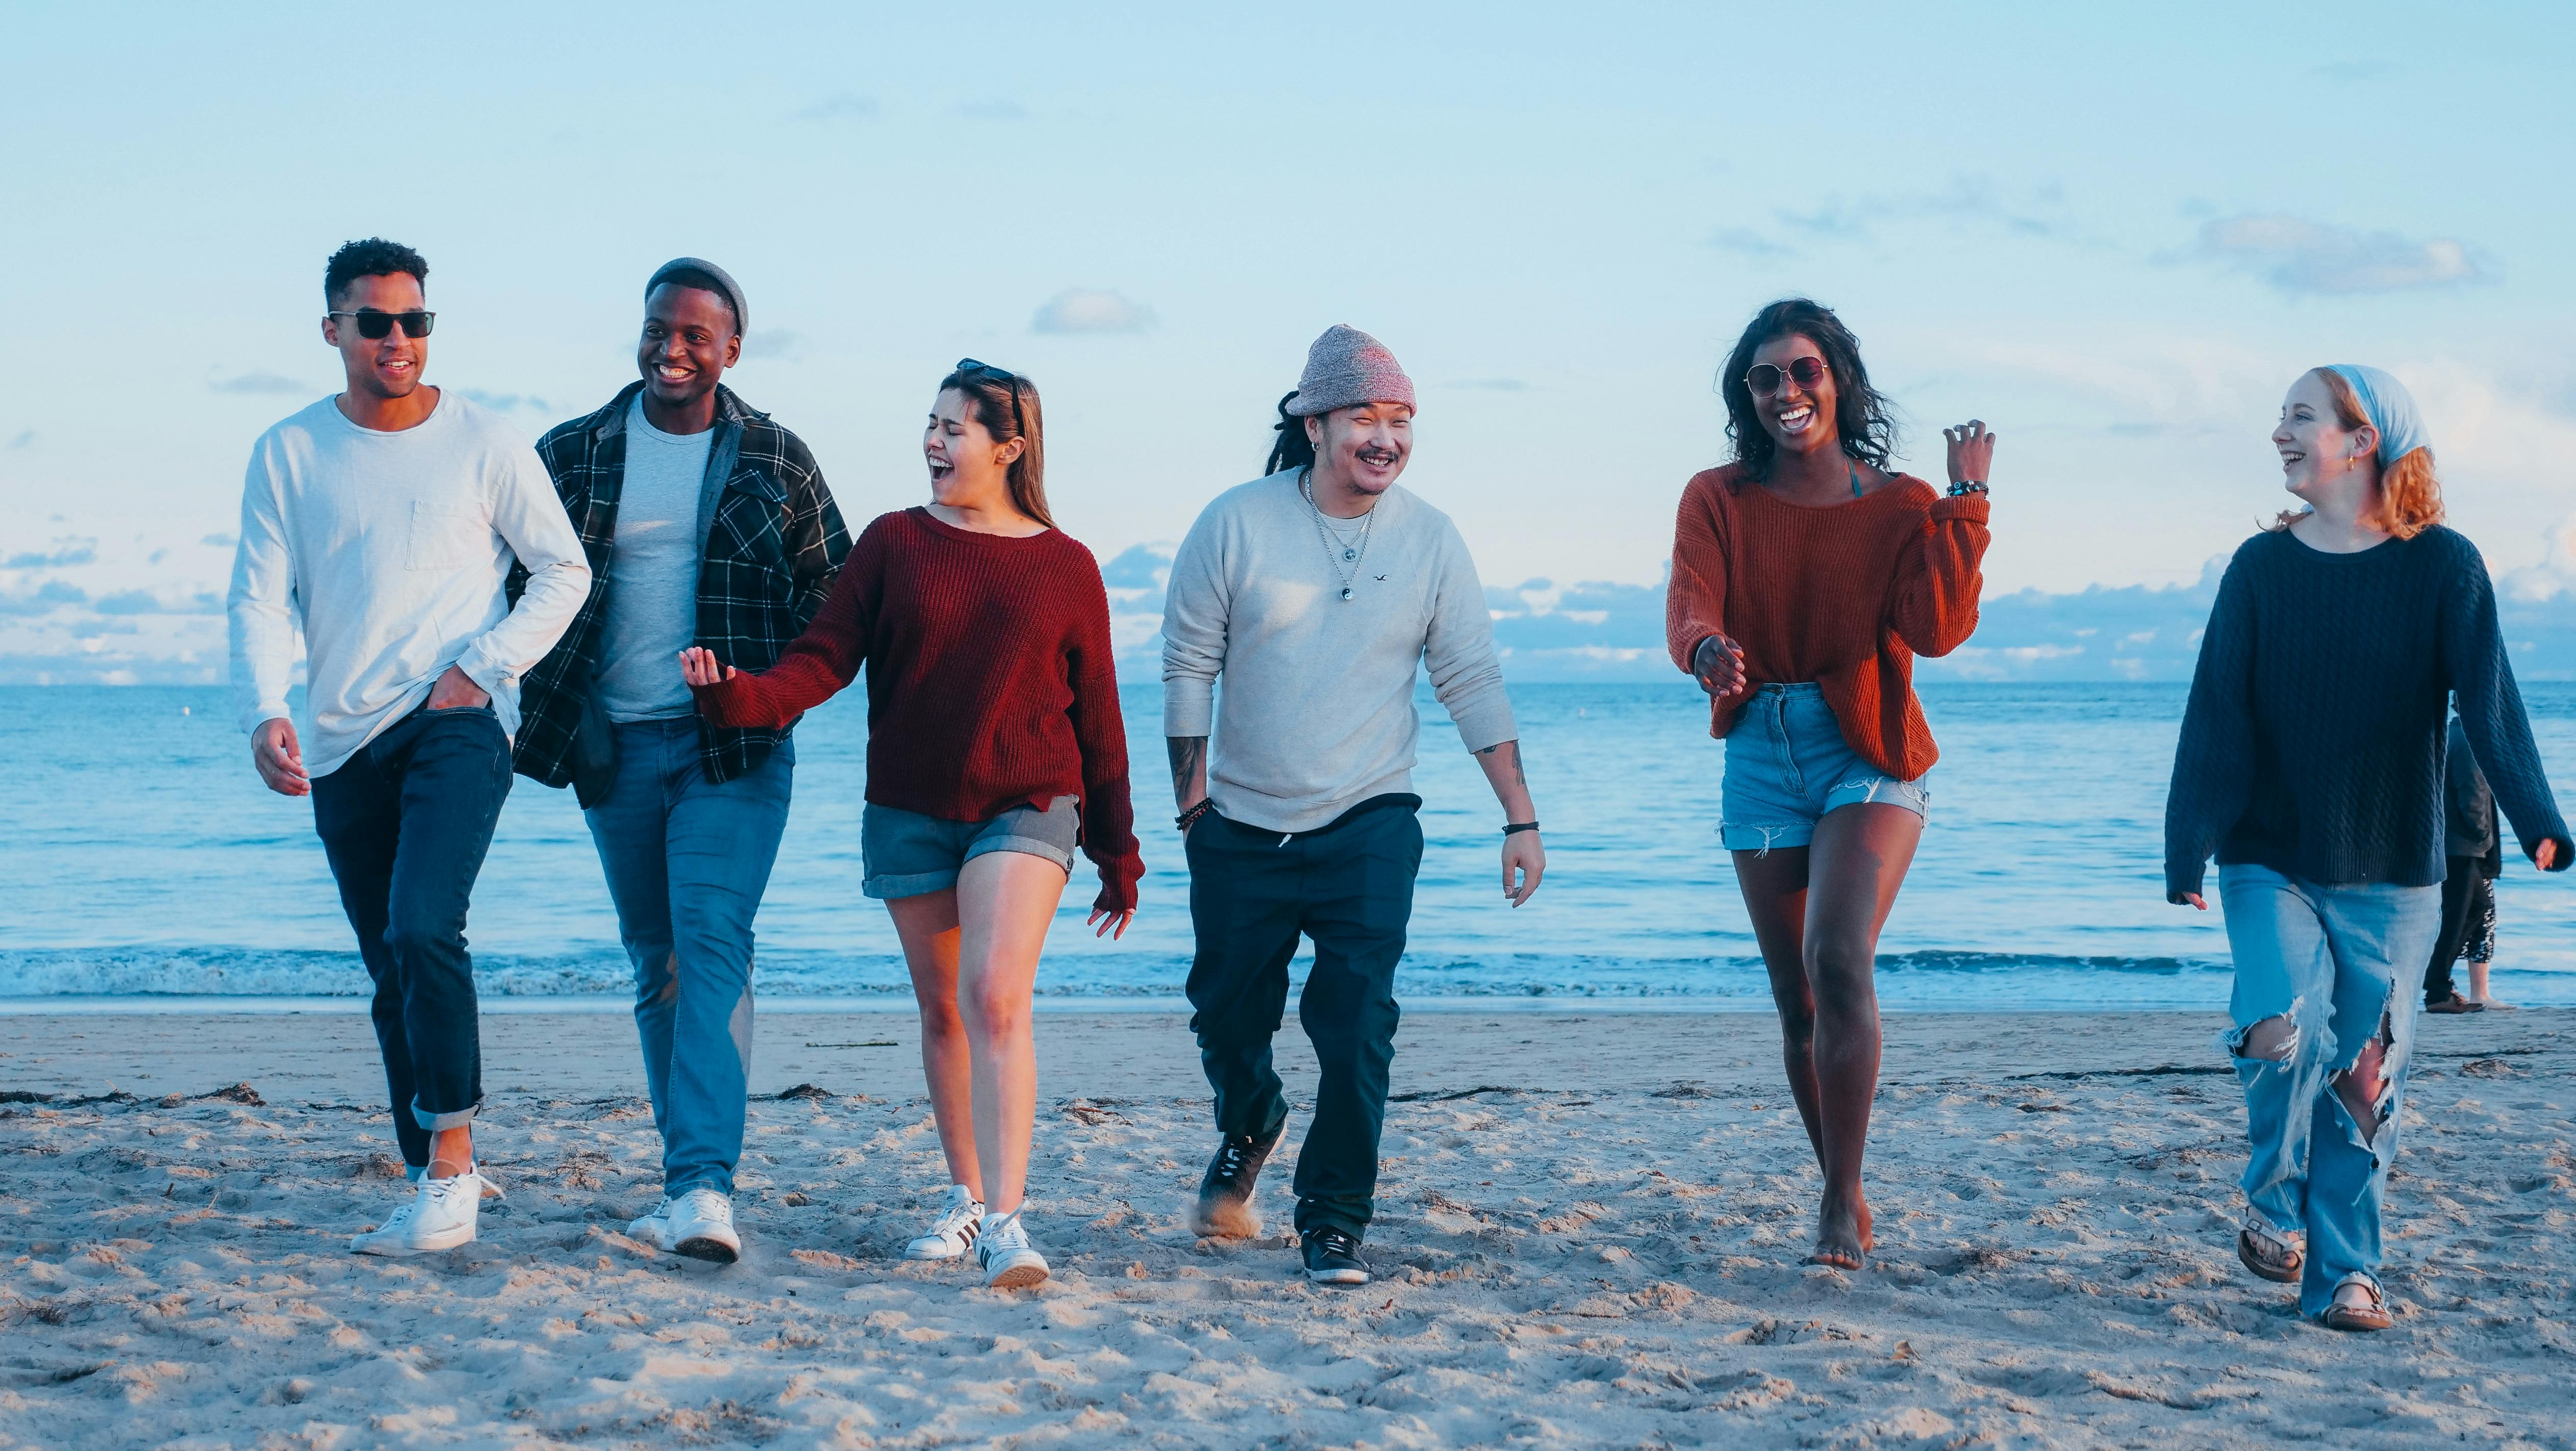 A group of friends walking on the beach | Source: Pexels